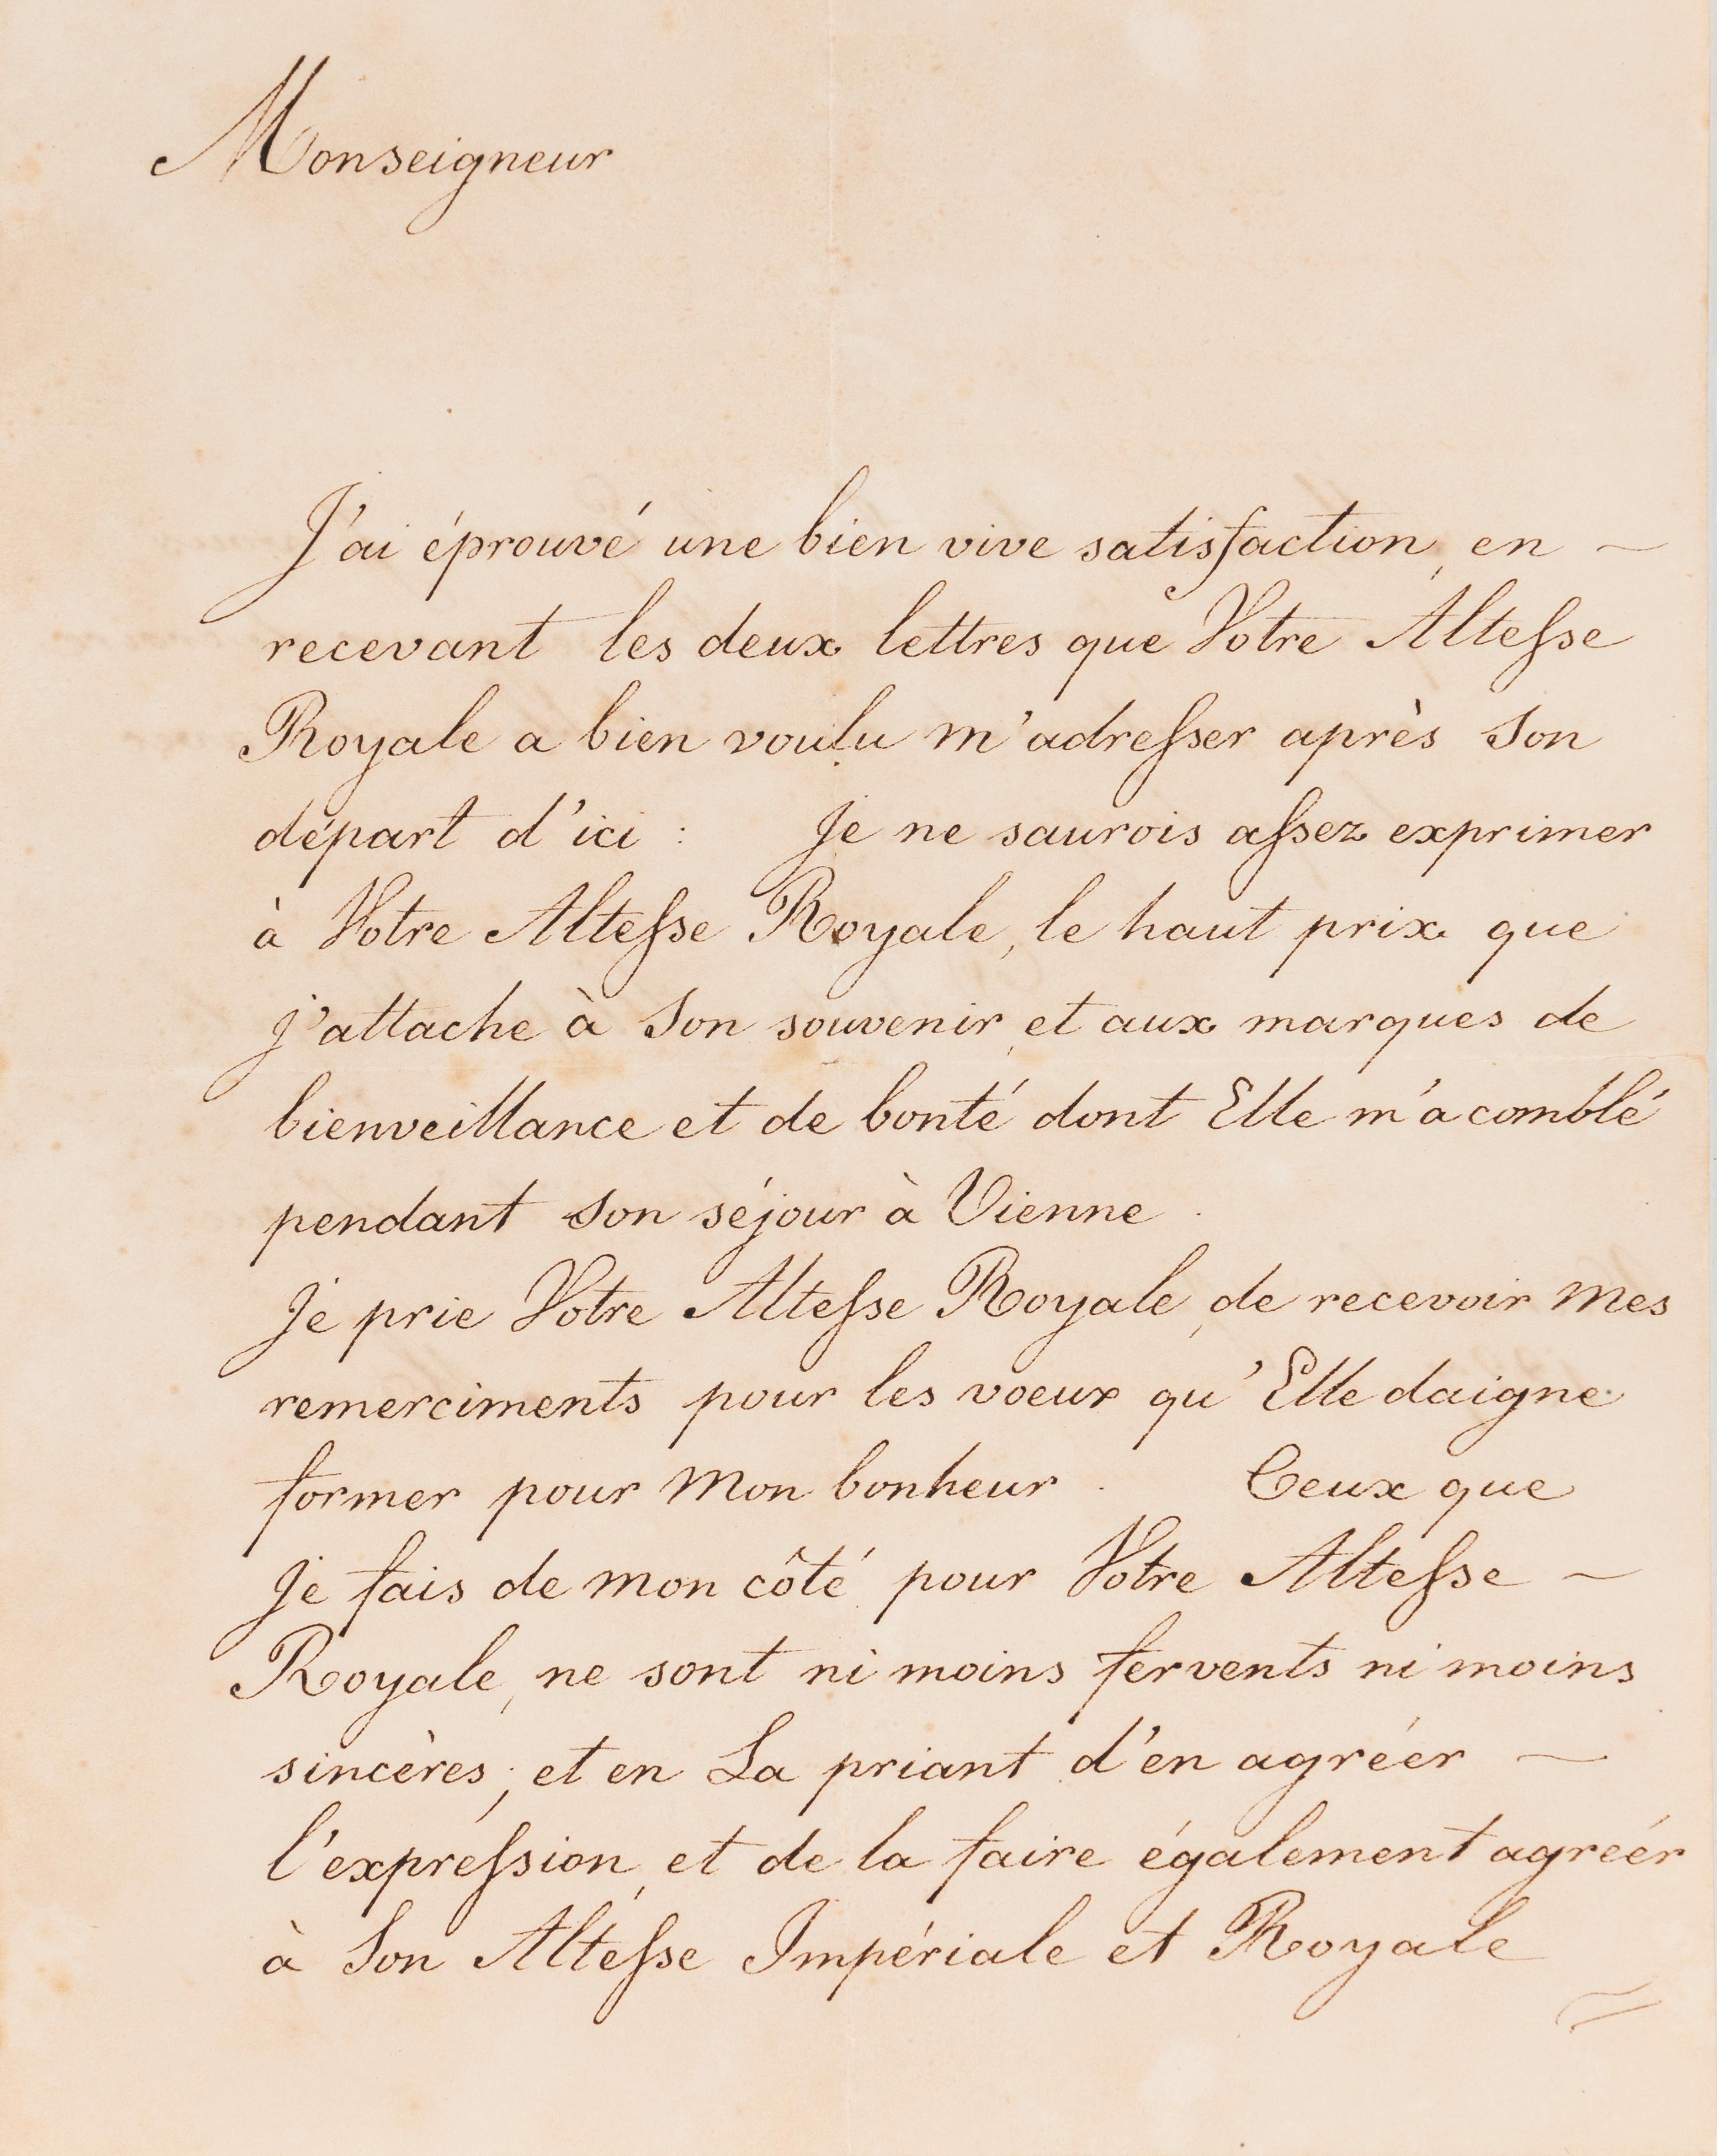 A letter by King Miguel I of Portugal to Anthony of Saxe